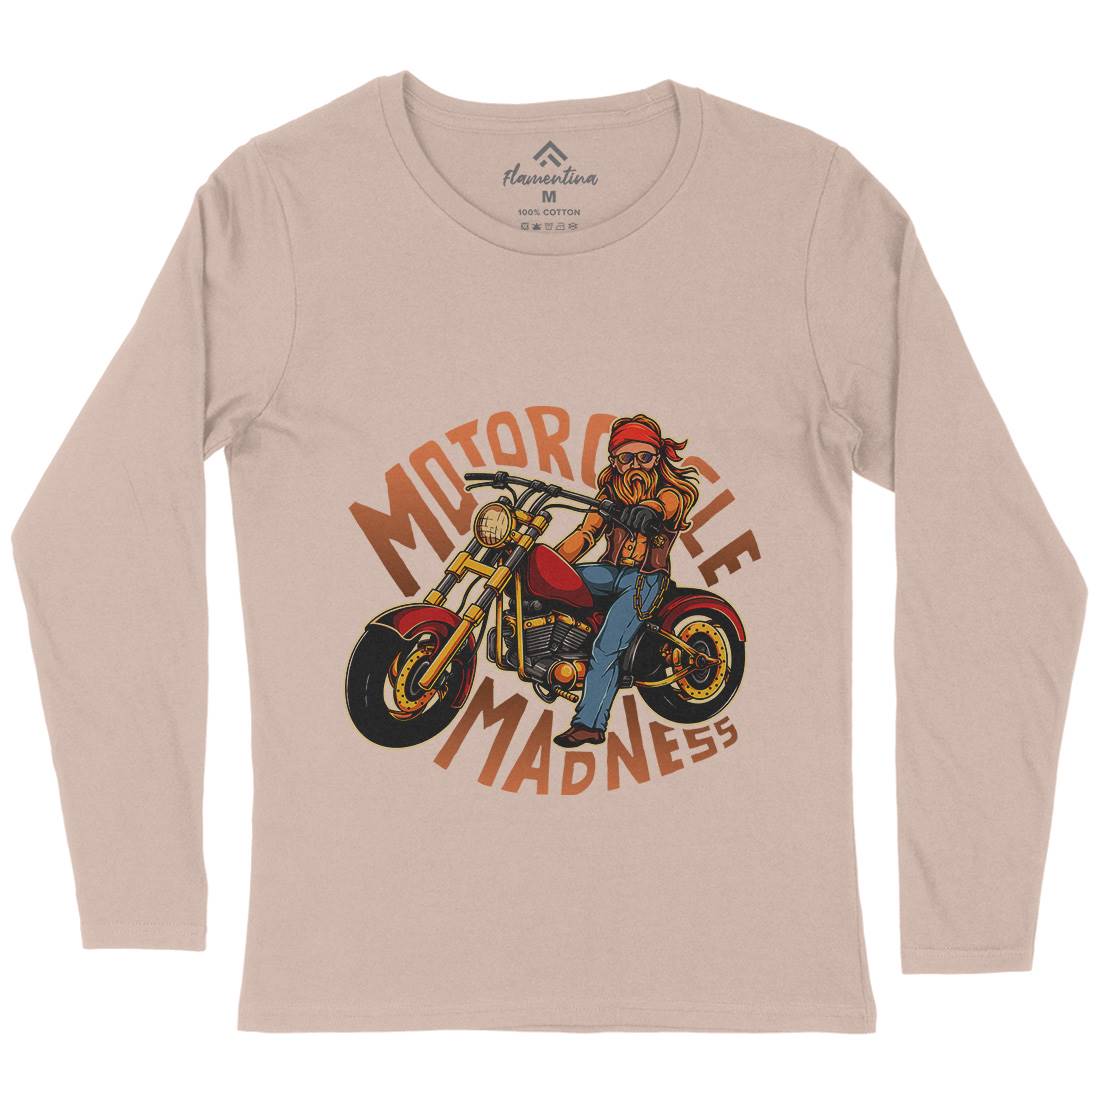 Madness Womens Long Sleeve T-Shirt Motorcycles A438